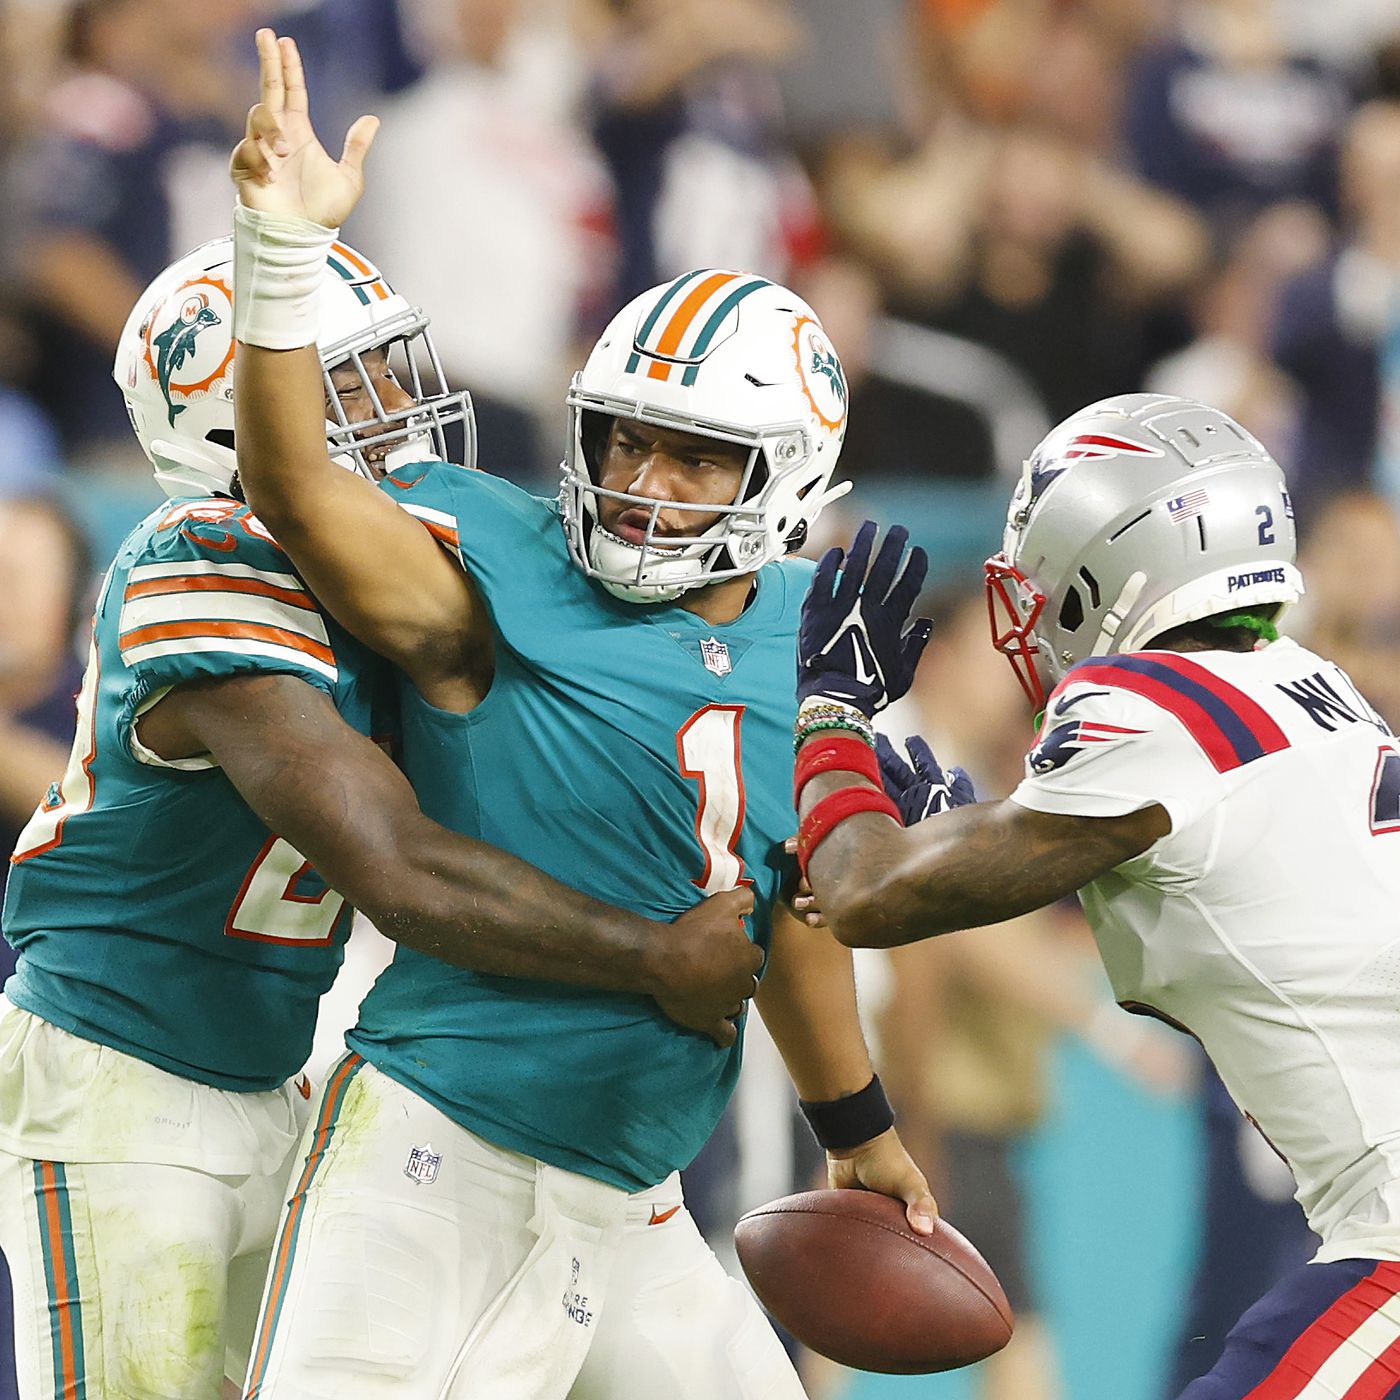 Miami Schedule 2022 Dolphins 2022 Schedule: Opponents Set For Next Year - The Phinsider